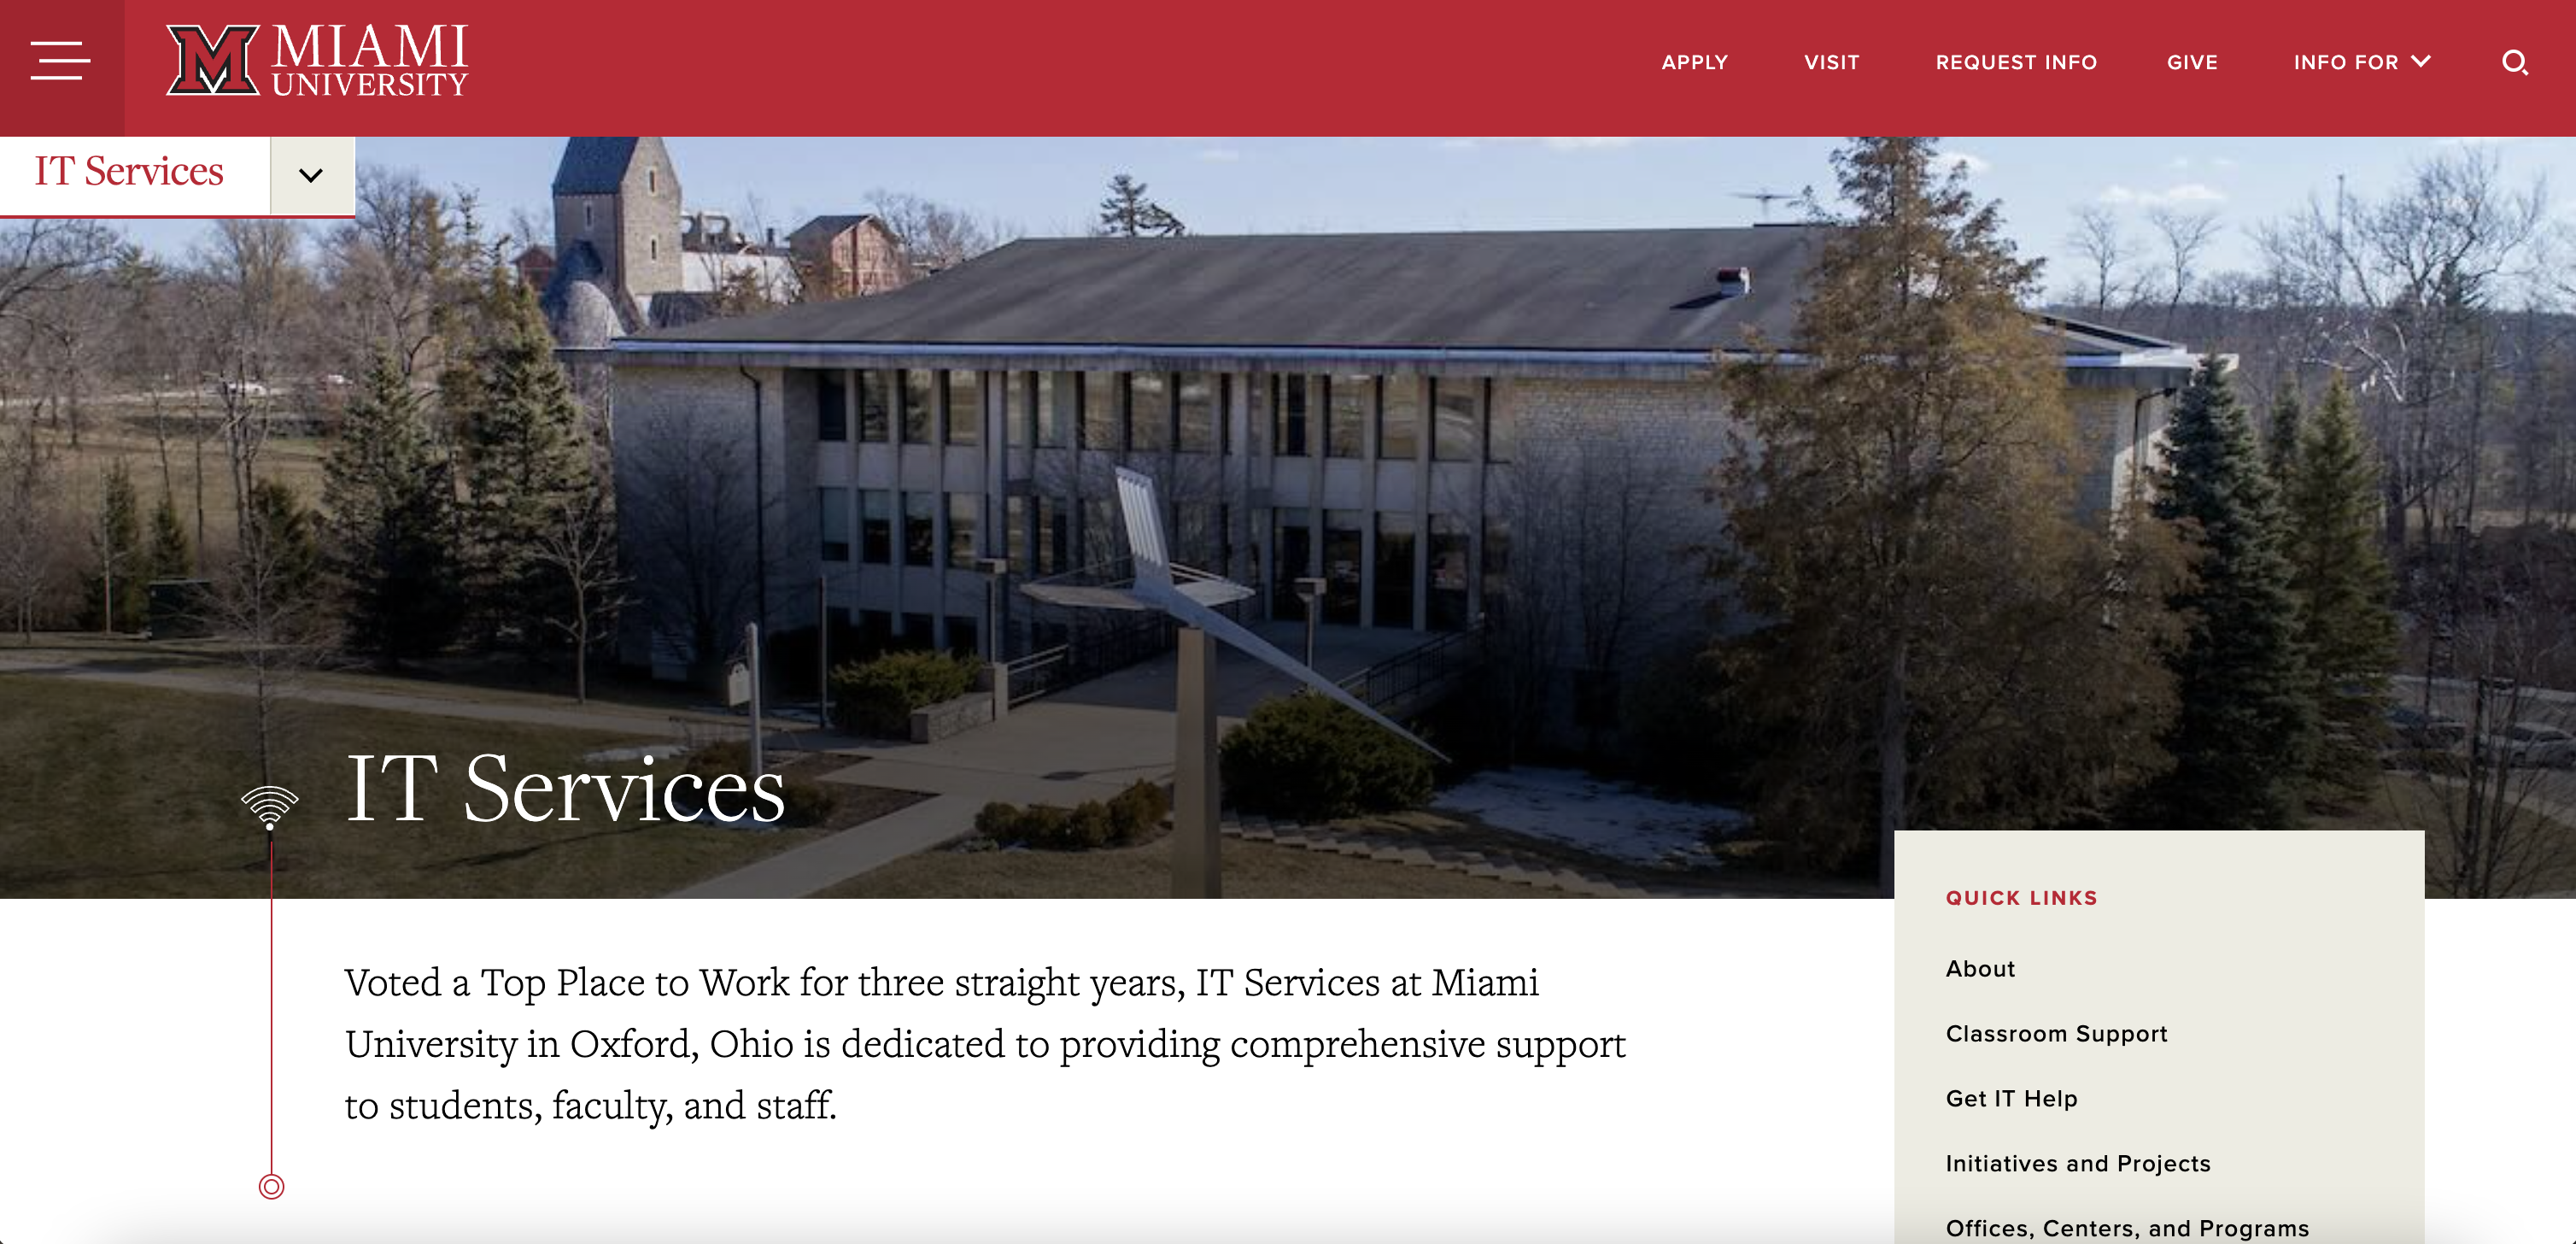 The front page of the IT Services website. It displays the menu, quicklinks that include initiatives, about, classroom support, and a paragraph describing how we won best place to work for three years running.